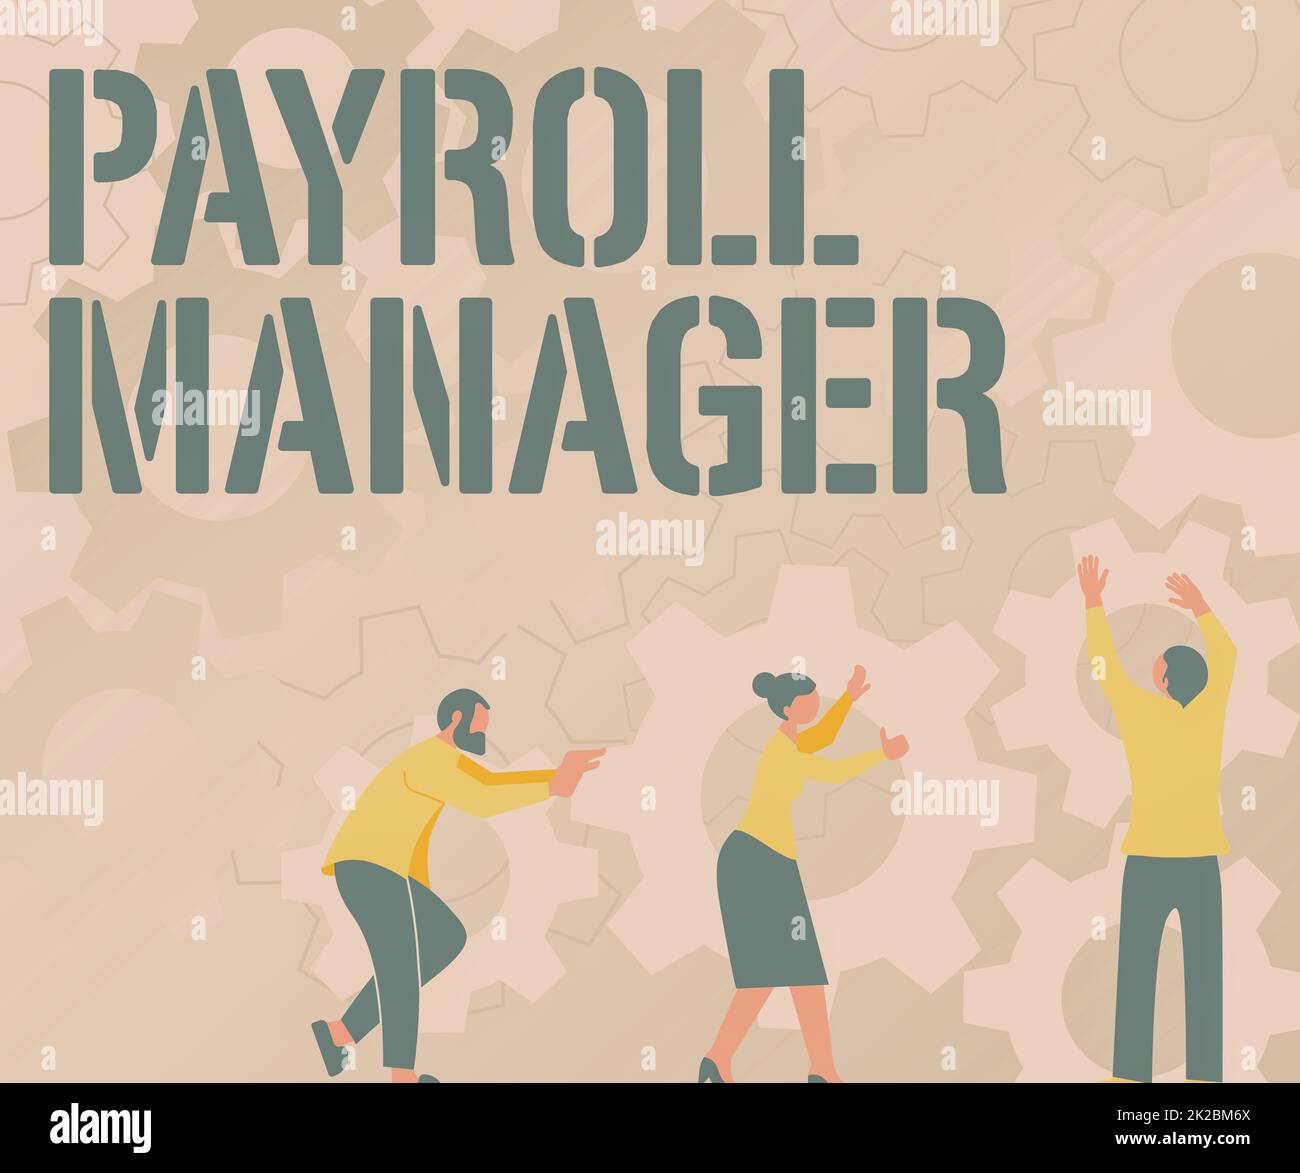 Conceptual display Payroll Manager. Internet Concept Maintains payroll information by designing systems Colleagues Carrying Cogwheels Arranging New Workflow Achieving Teamwork. Stock Photo